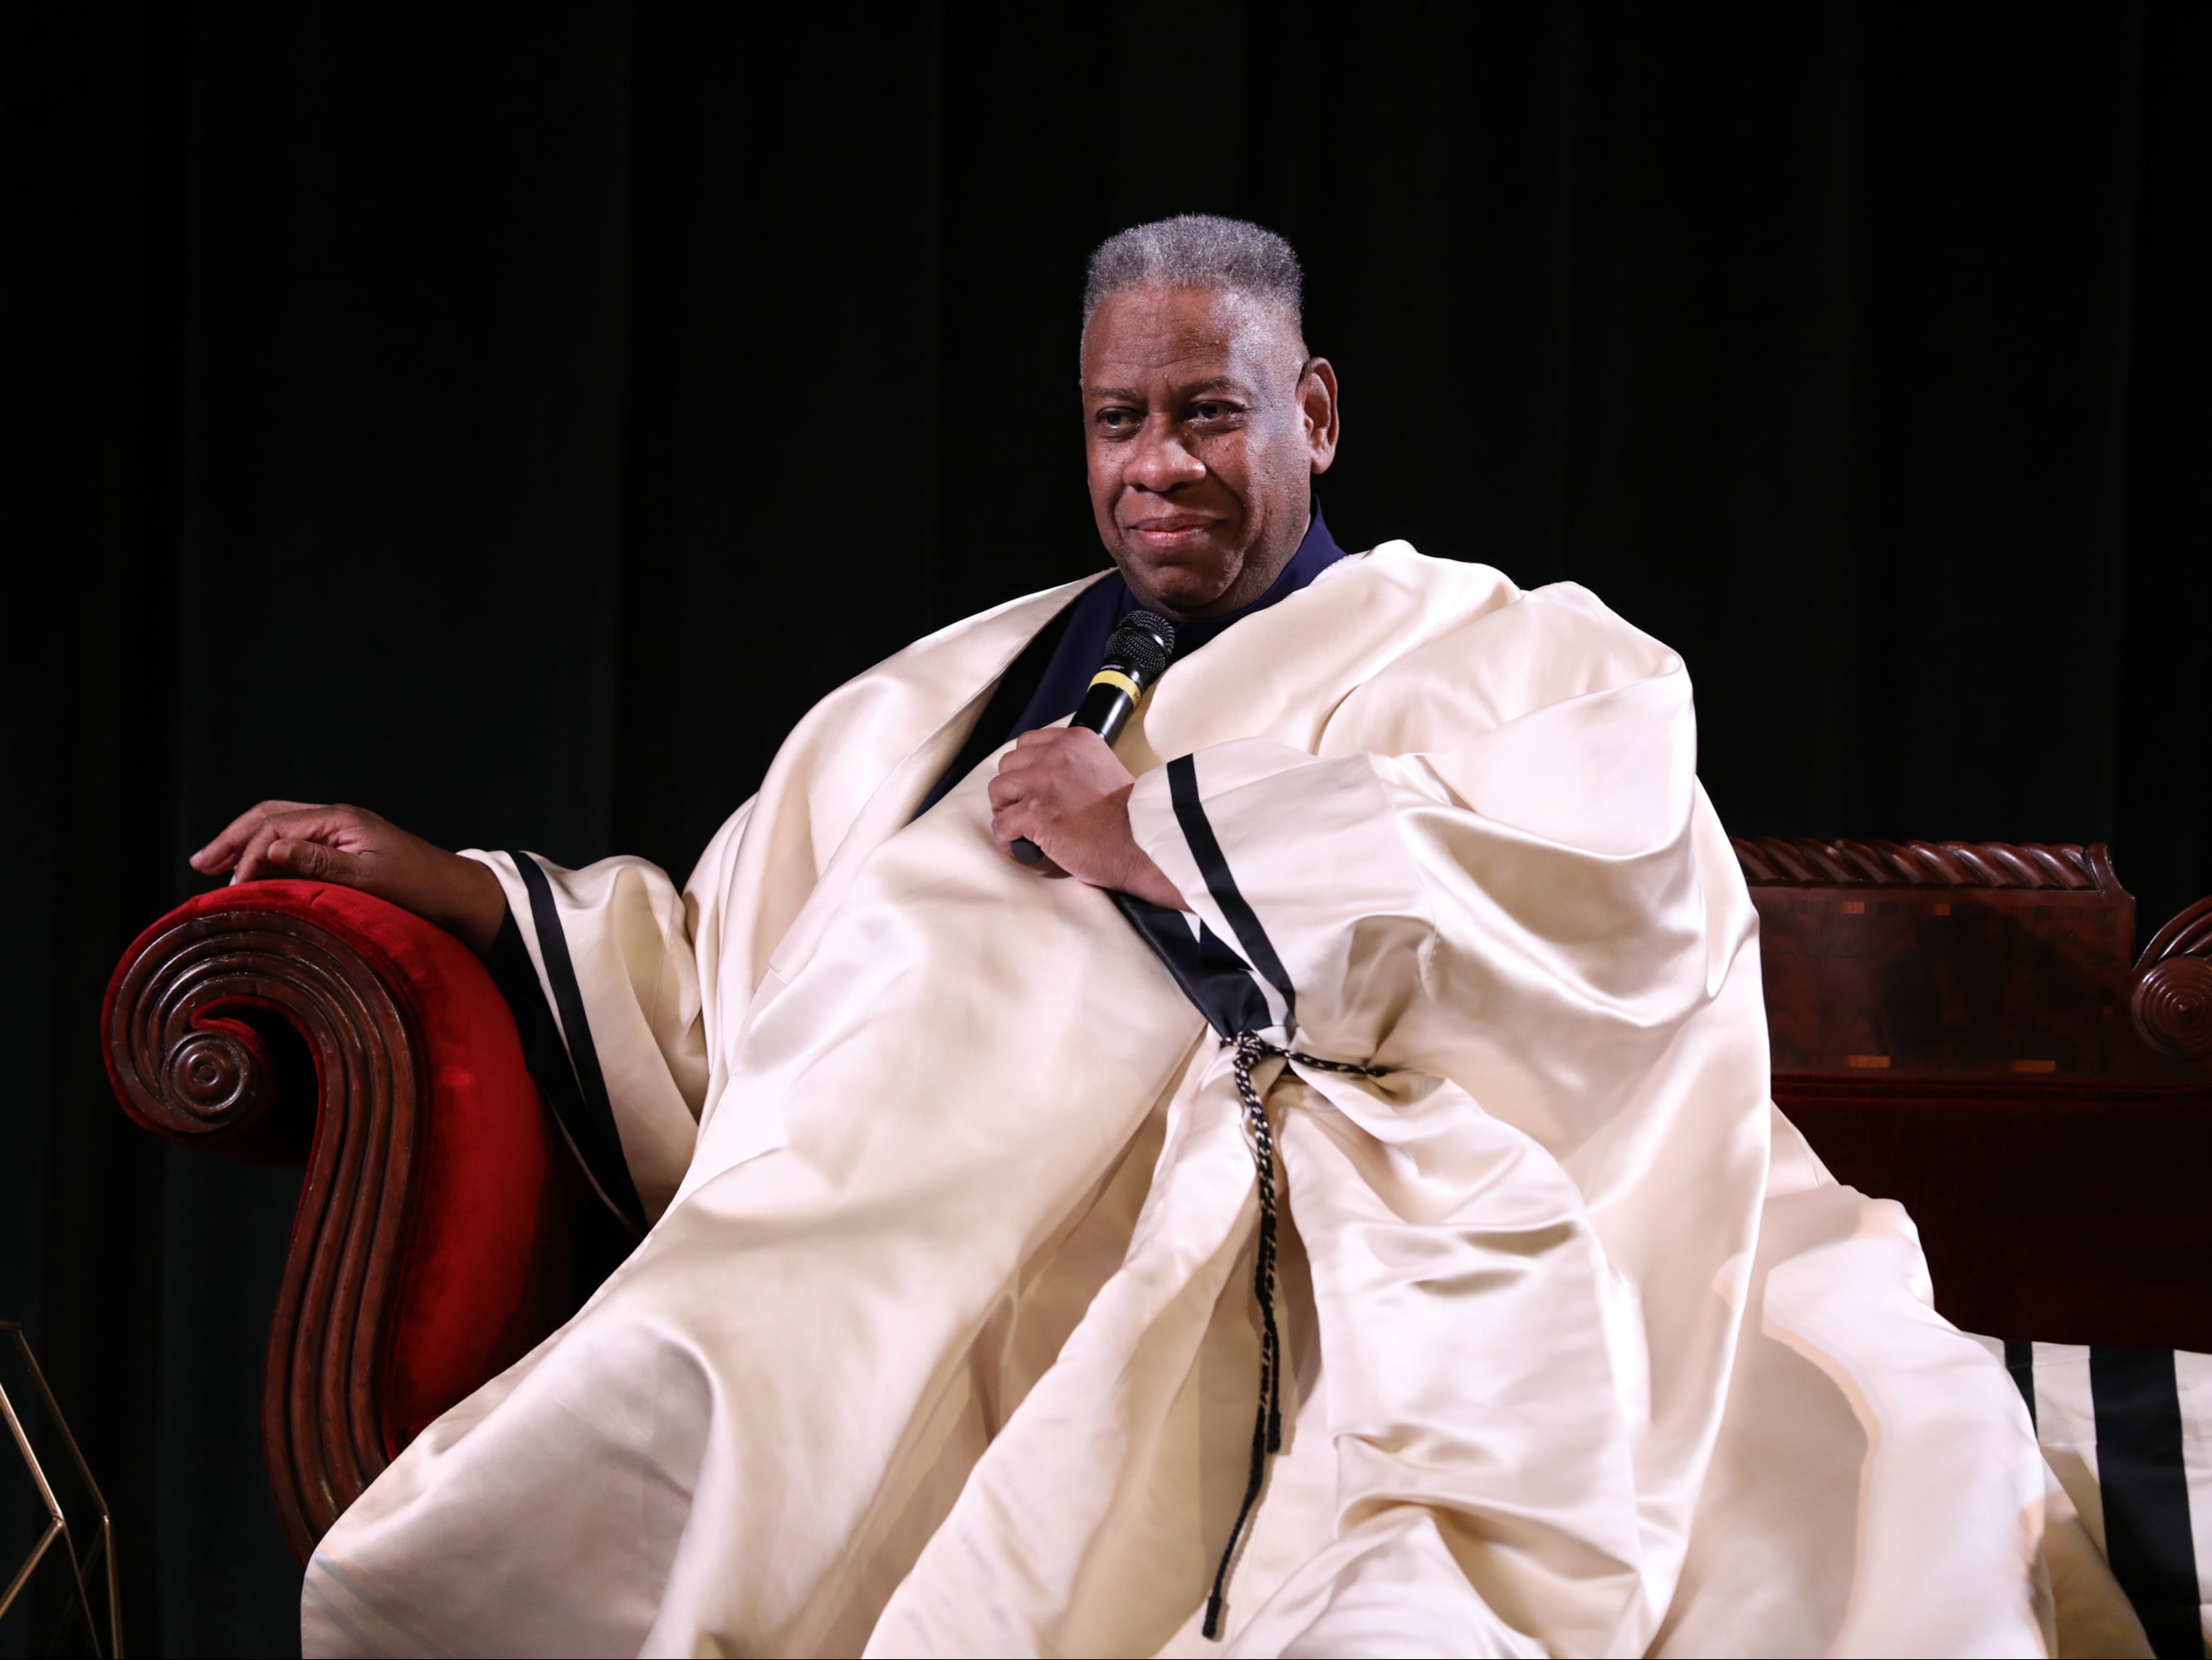 Andre Leon Talley speaks during 'The Gospel According to AndrÂ' Q&A during the 21st SCAD Savannah Film Festival on November 2, 2018 in Savannah, Georgi